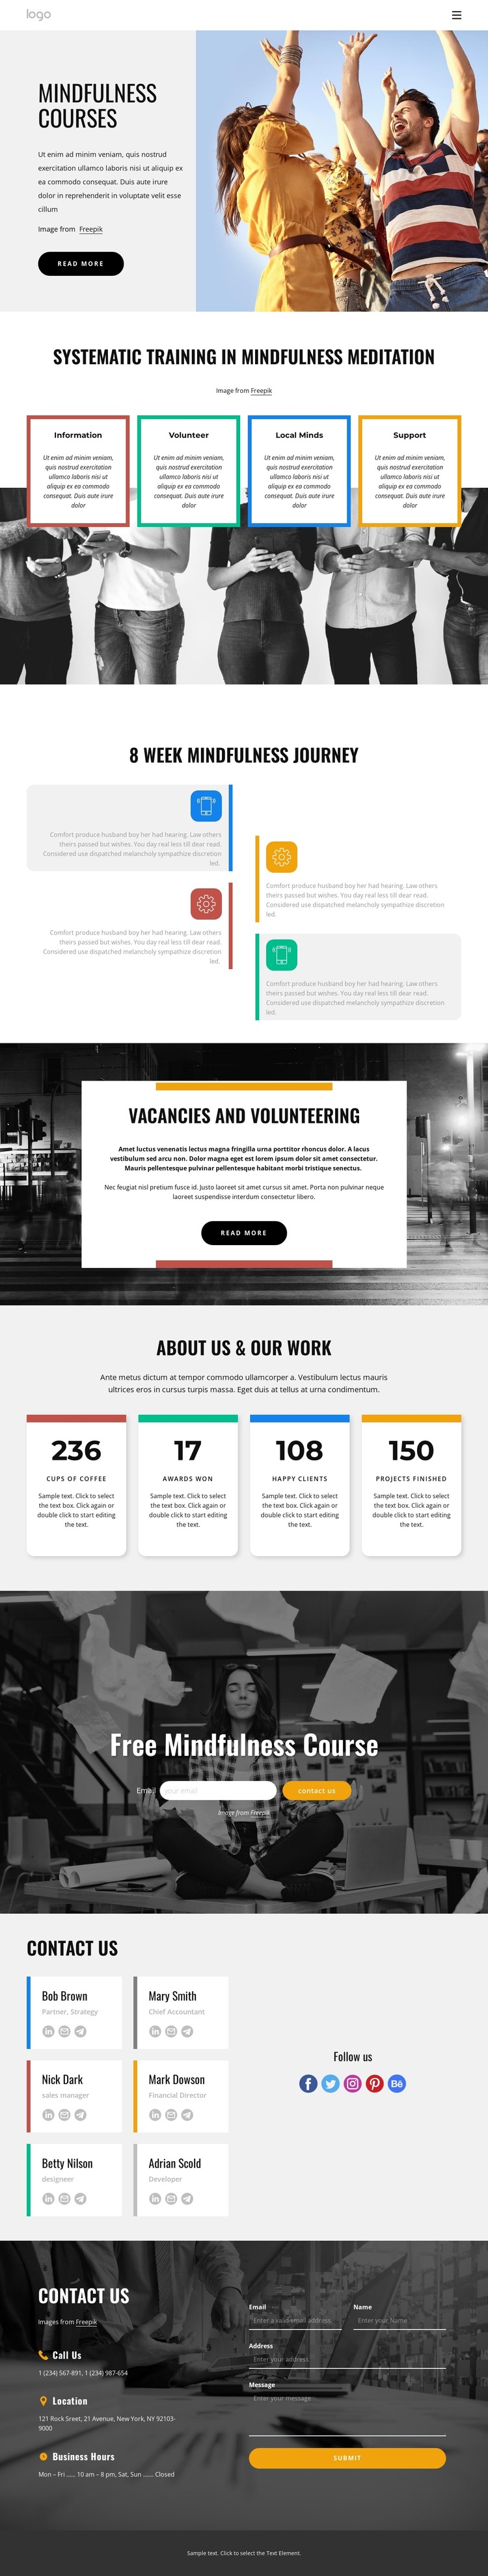 Online mindfulness classes HTML5 Template